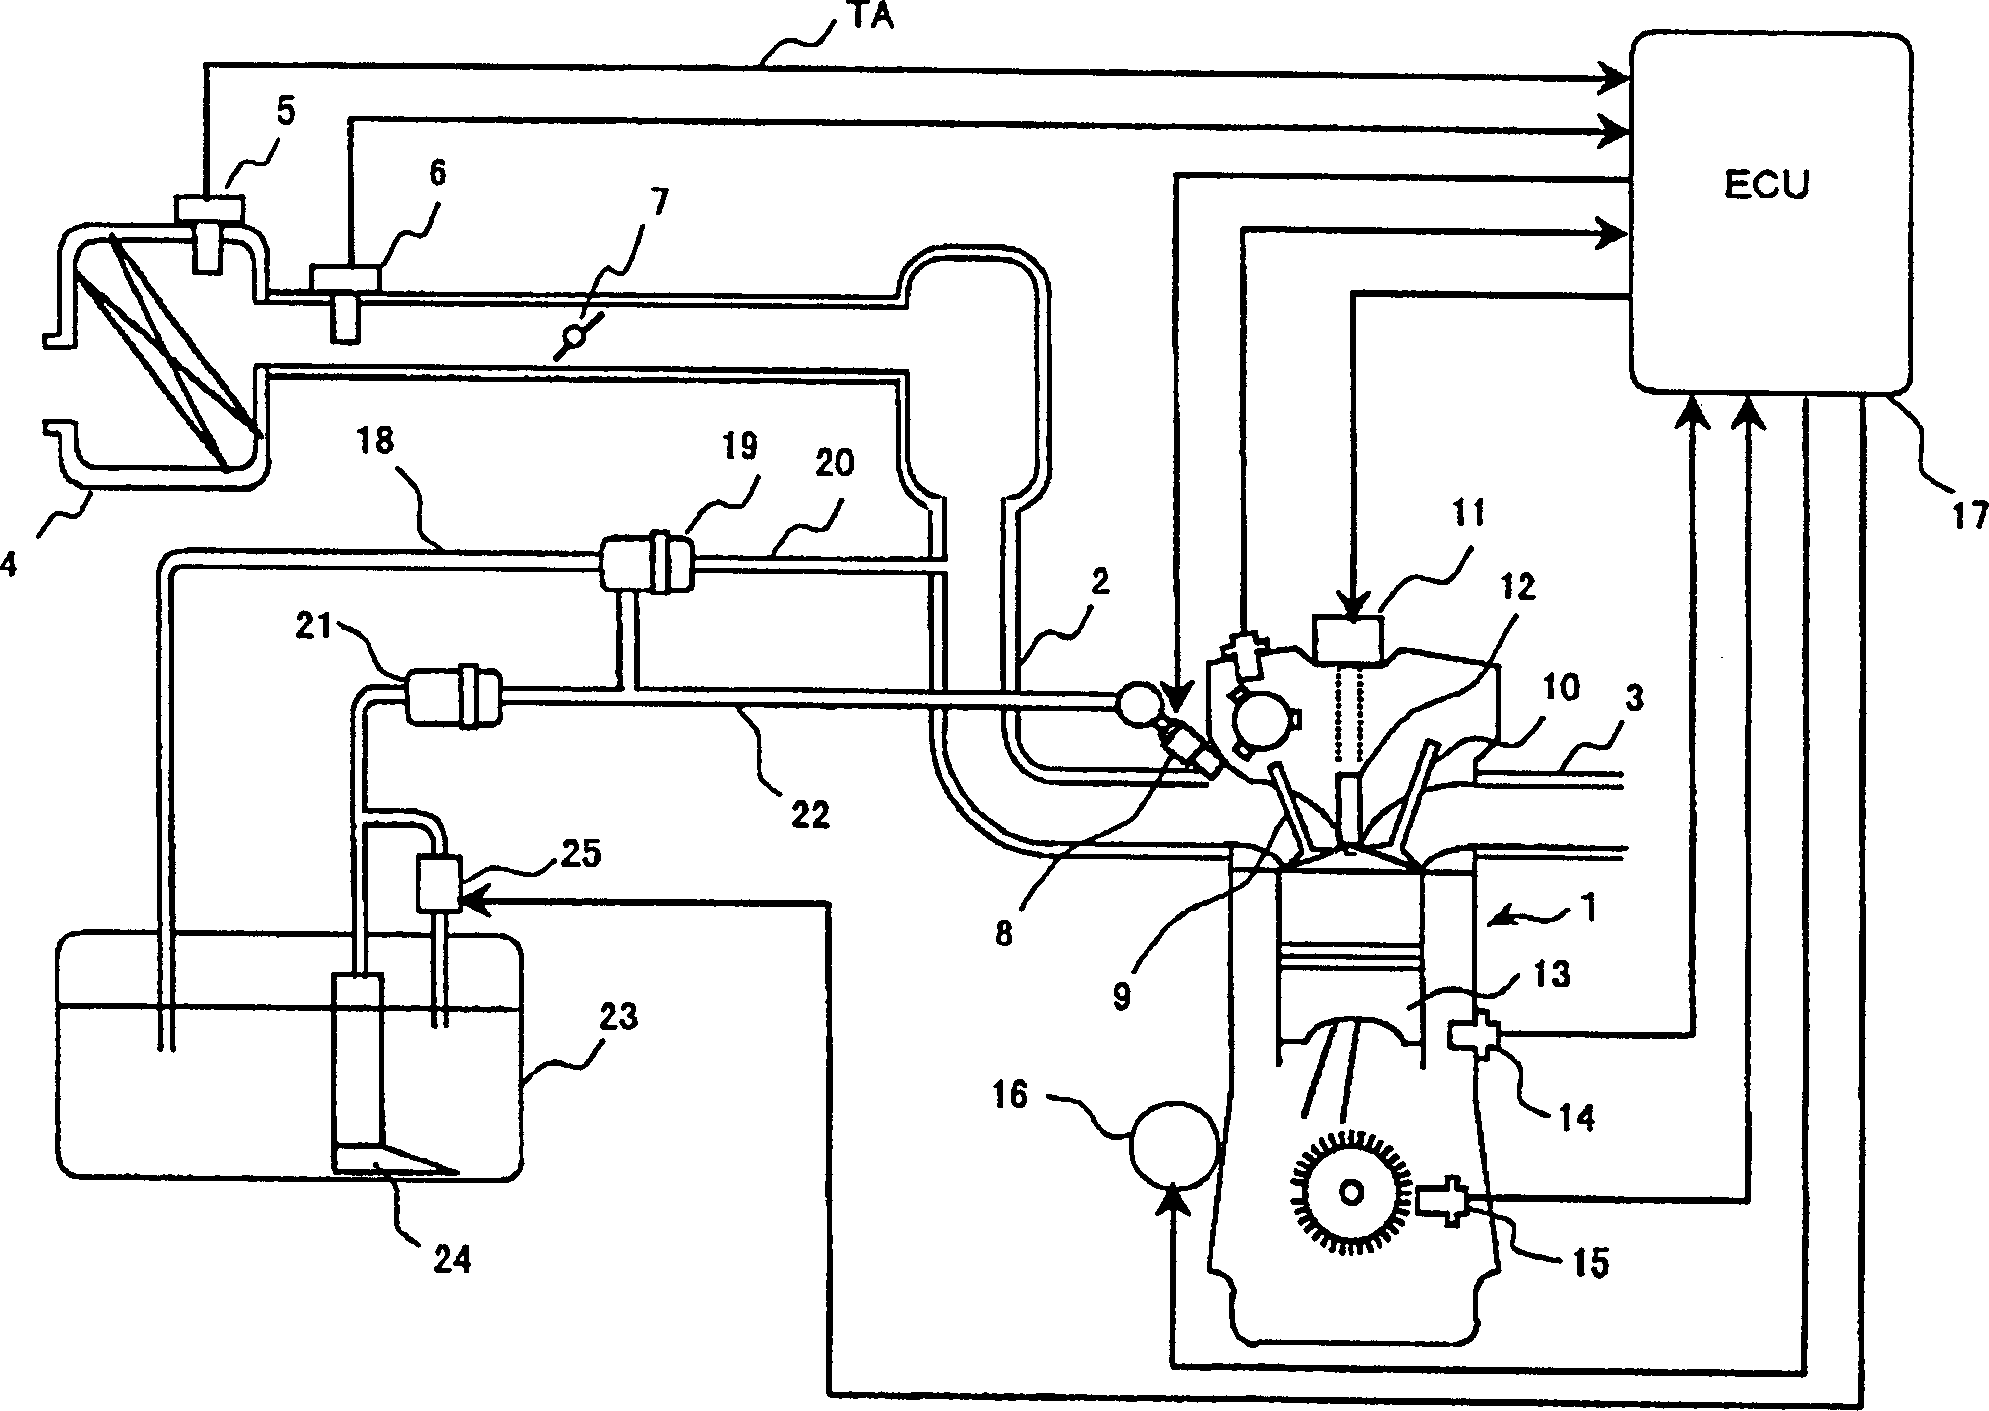 Fuel jetting controller for internal combustion engine